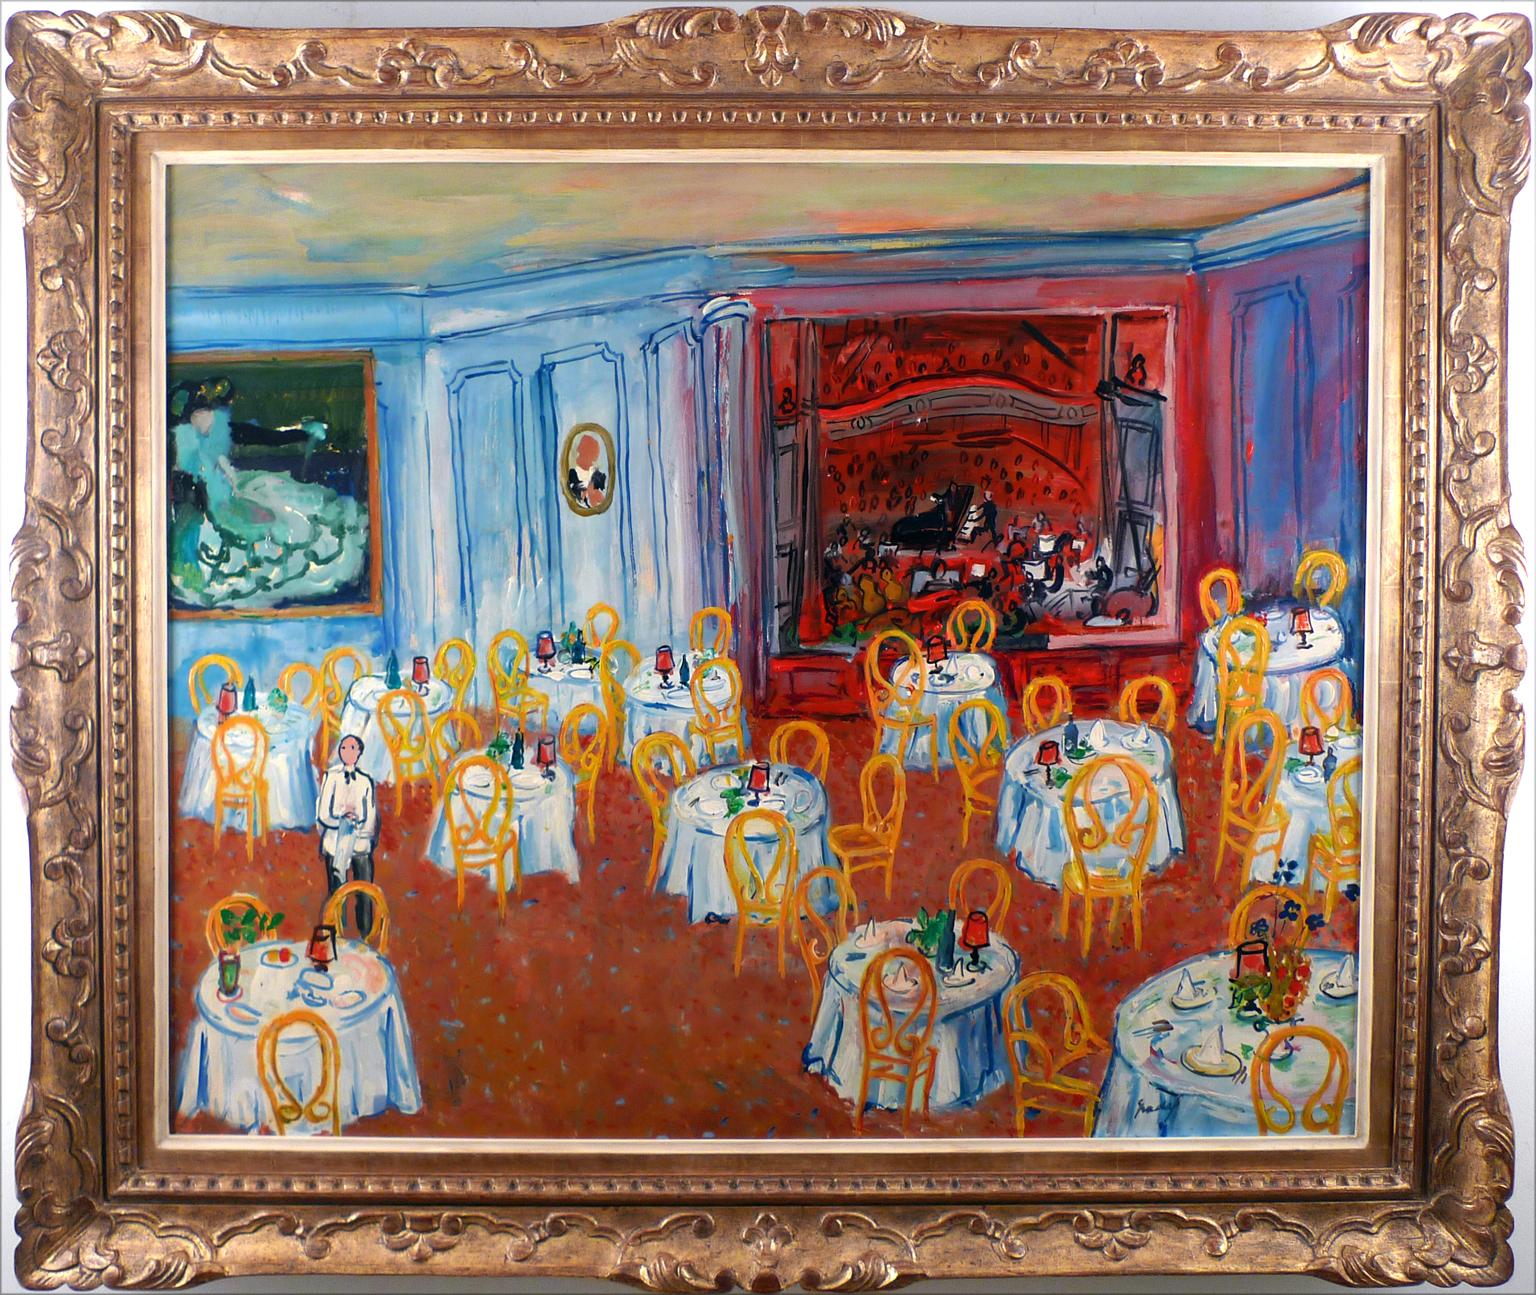 "Teatro Comedor", 20th Century Oil on Canvas by Spanish Artist Carlos Nadal